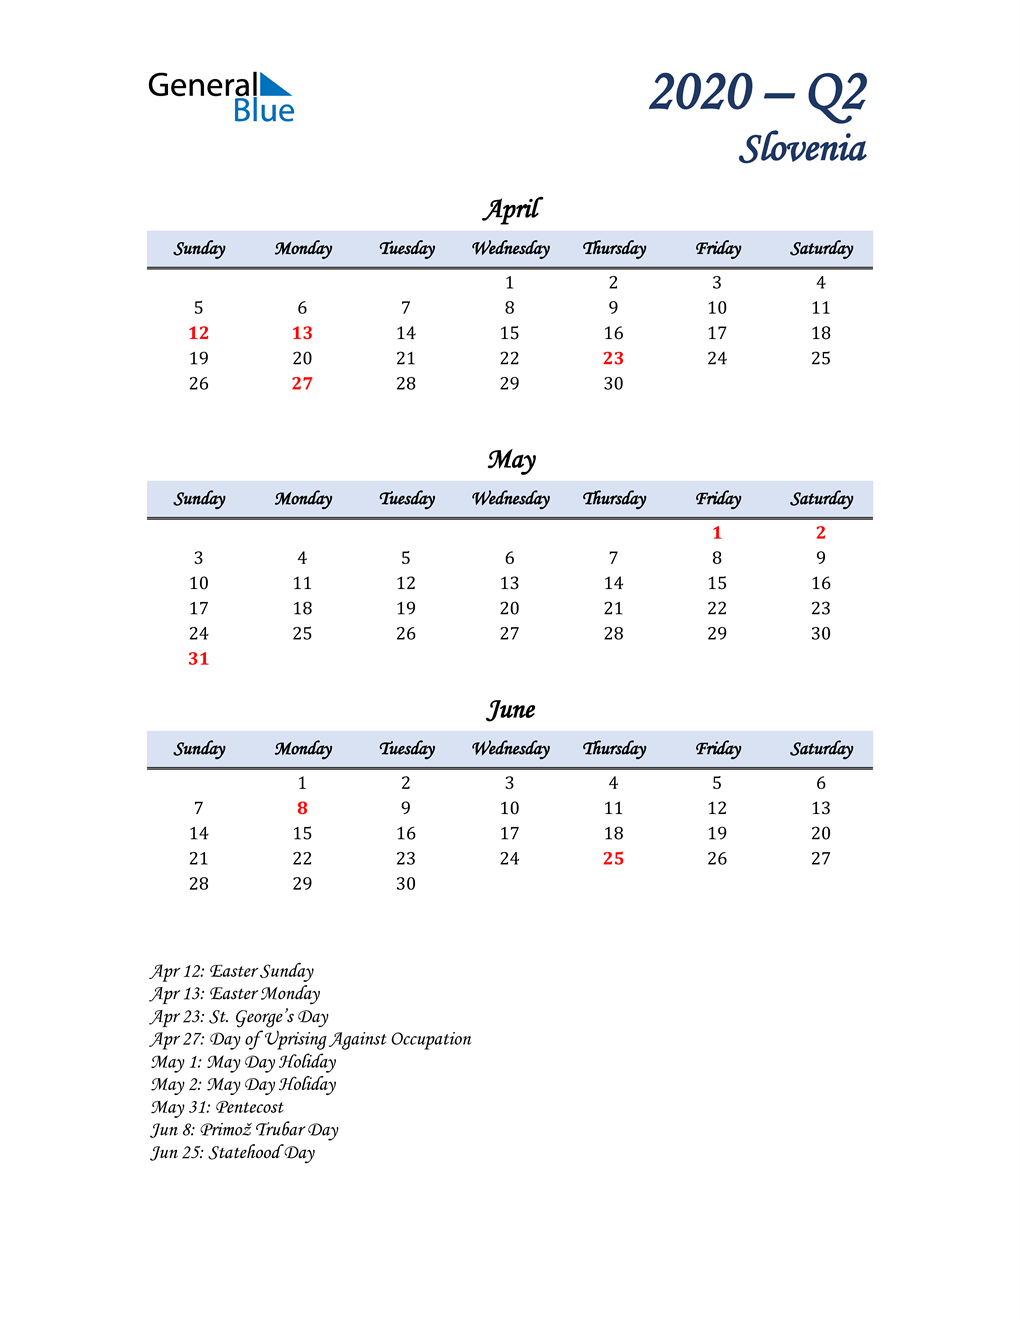  April, May, and June Calendar for Slovenia